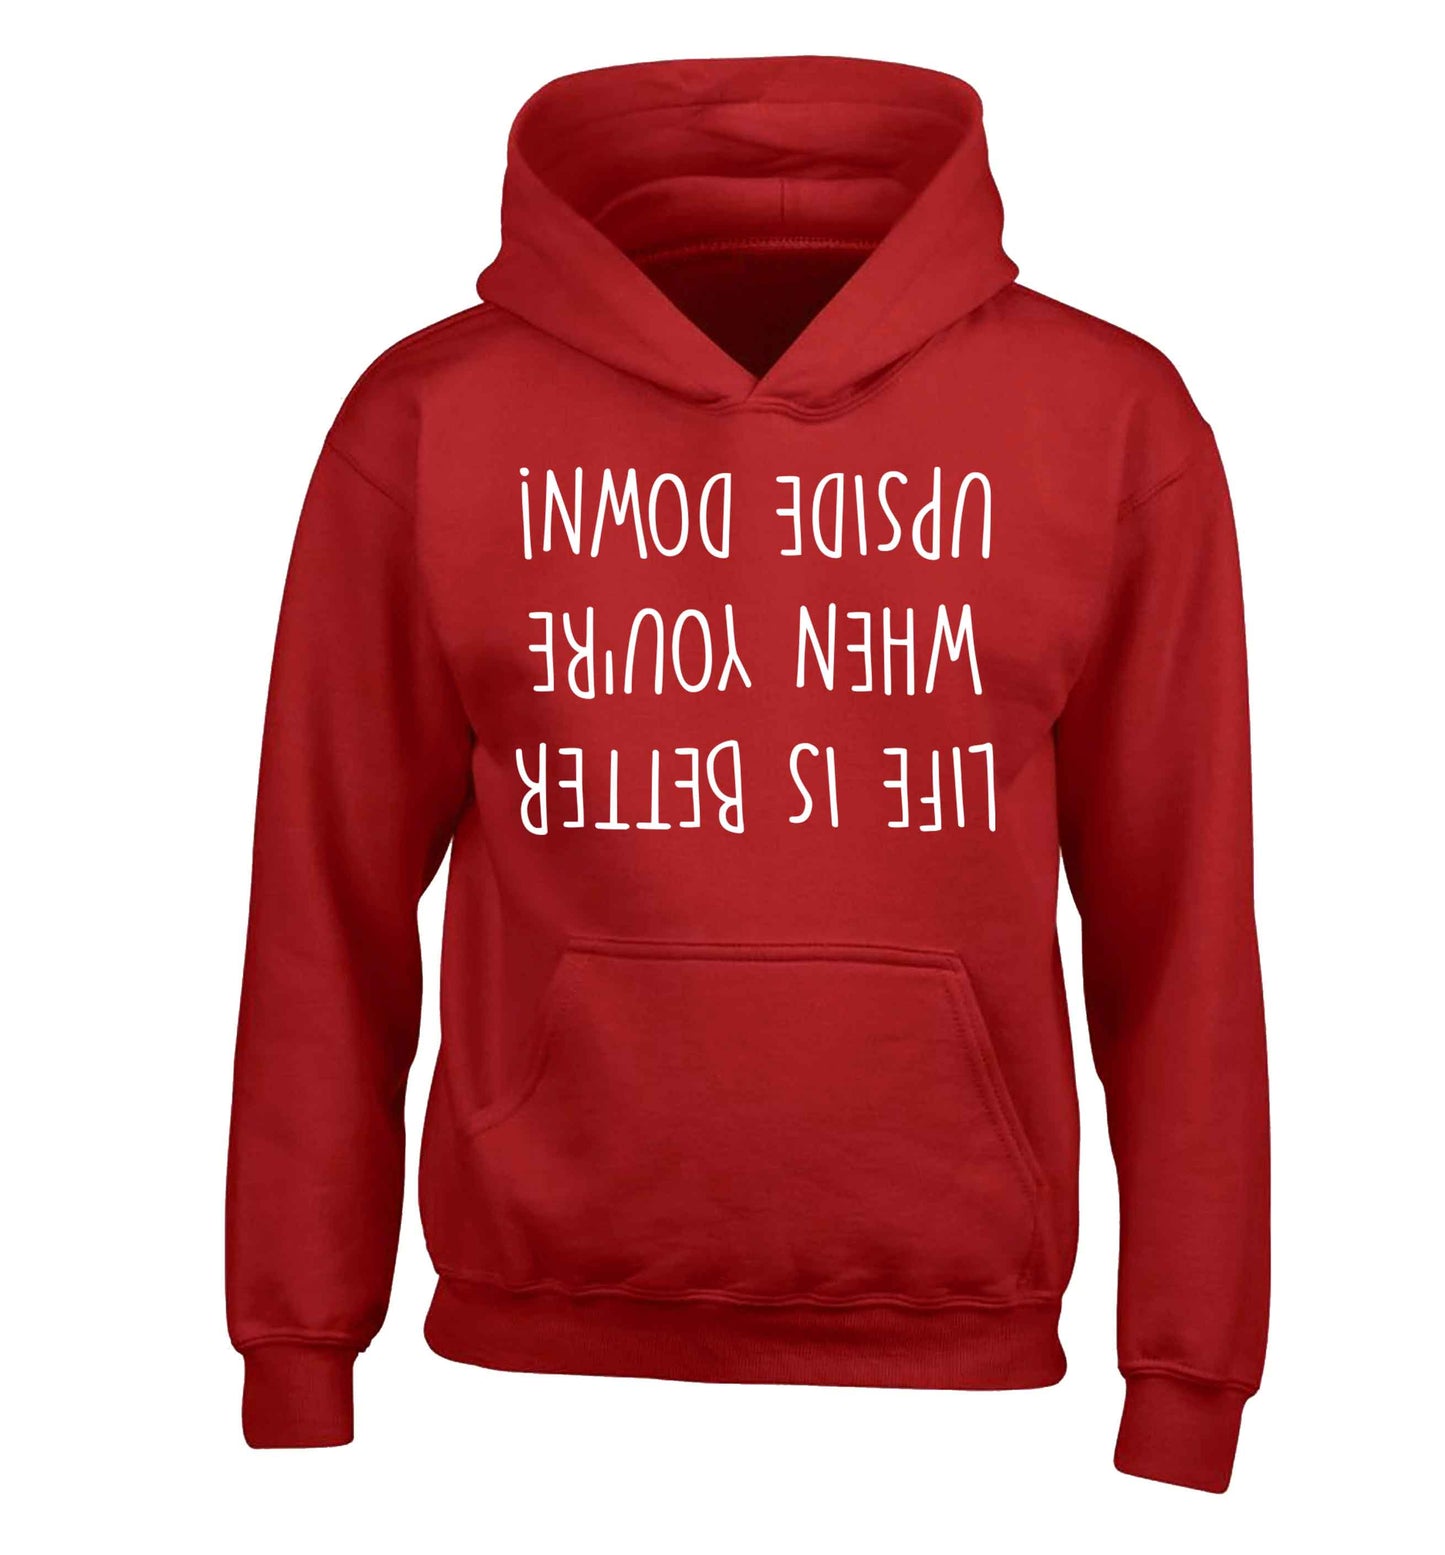 Life is better upside down children's red hoodie 12-13 Years